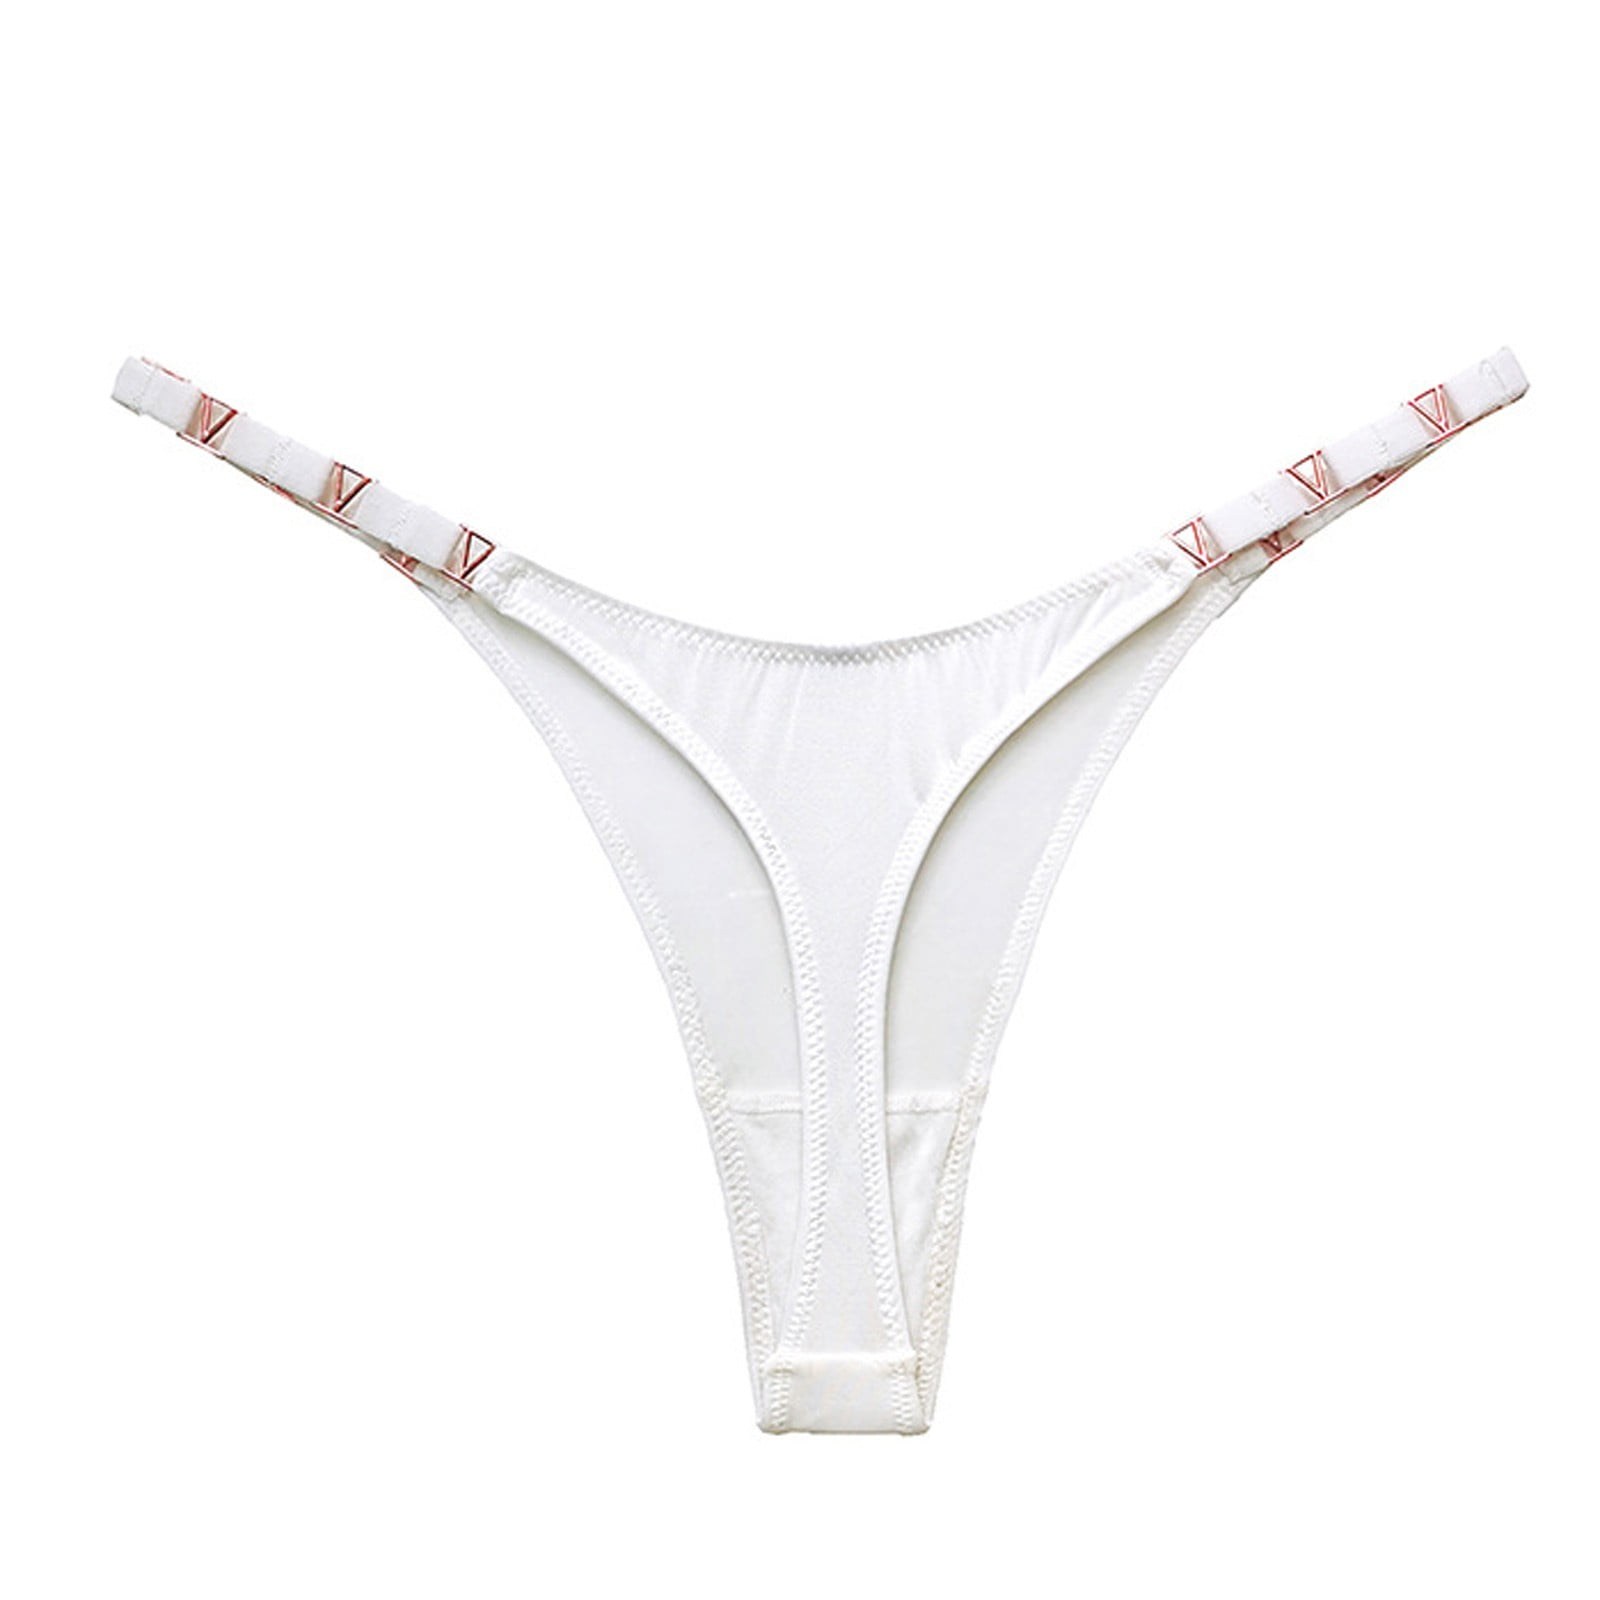 QWERTYU G String Thongs for Women Low Rise Panties Sexy No Show Underwear  Red M 